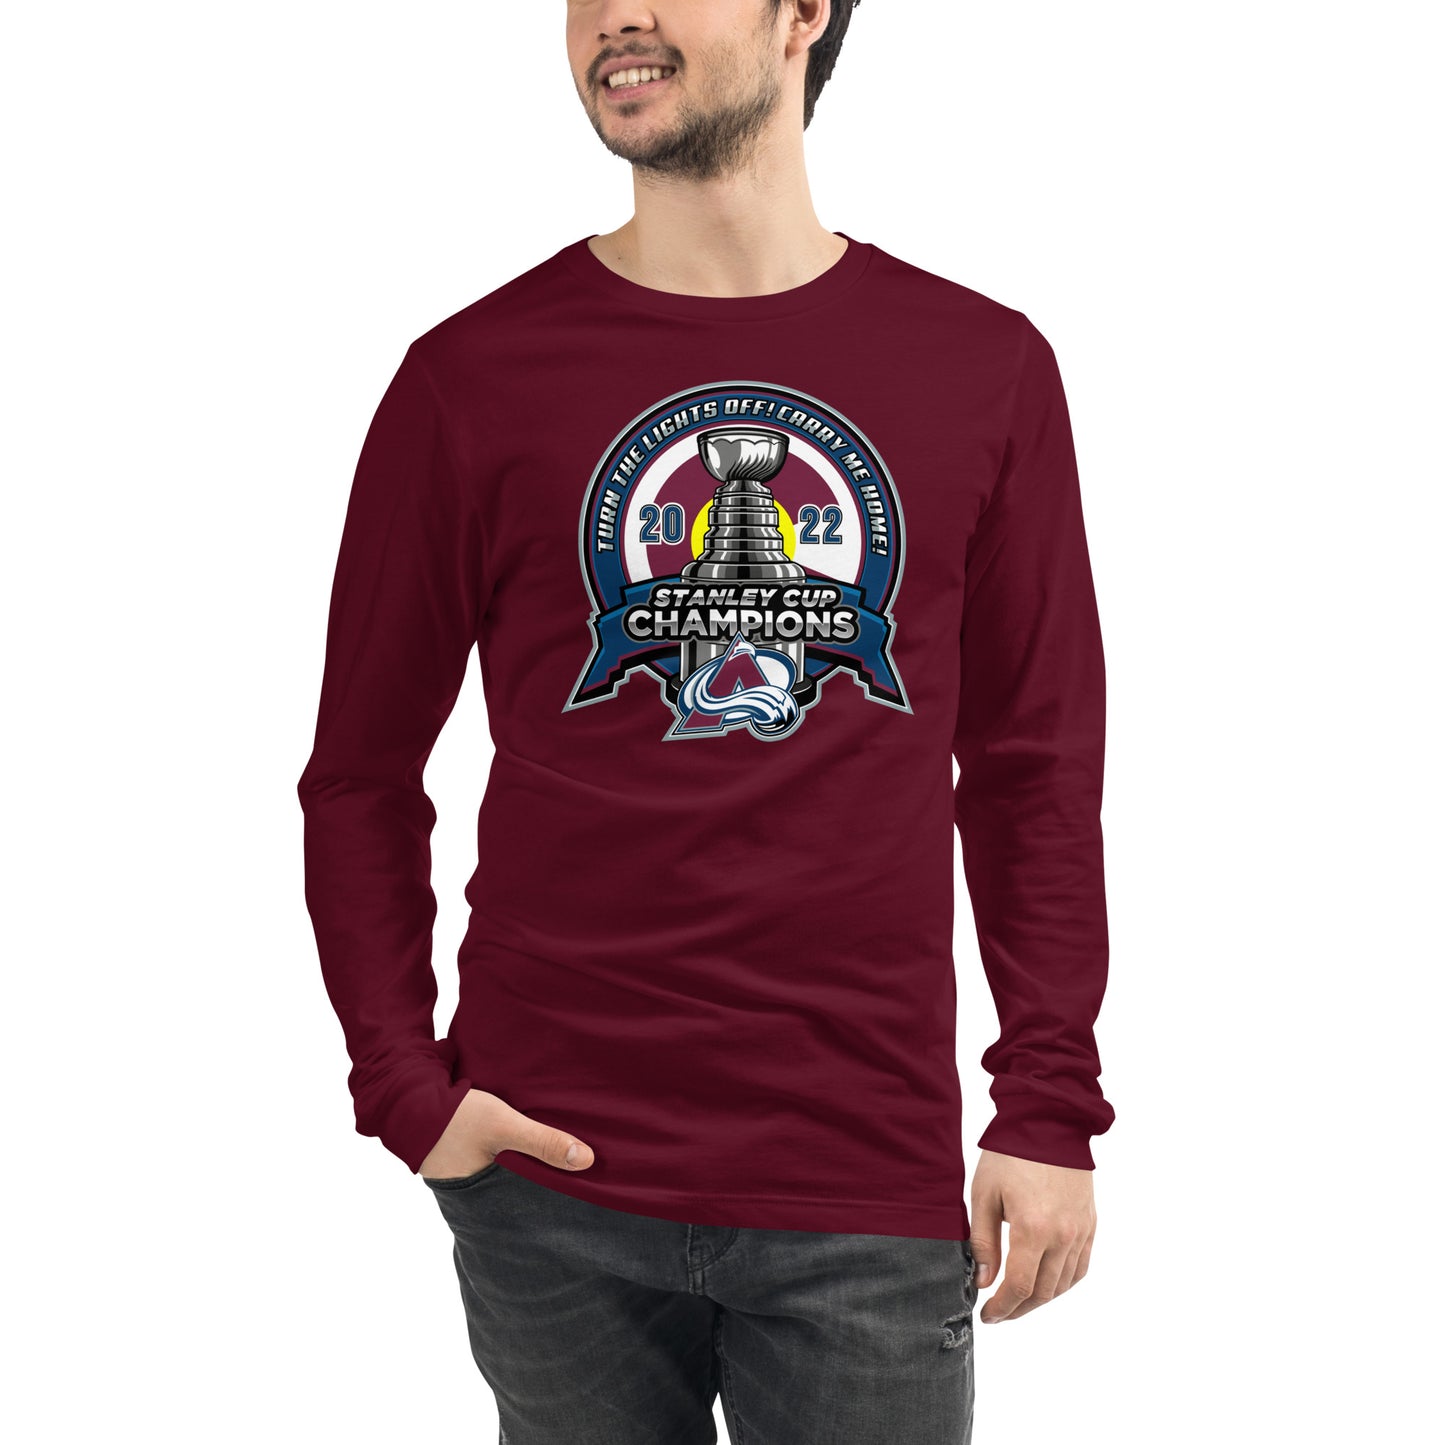 Turn The Lights Off, Carry Me Home Champs Long Sleeve Tee